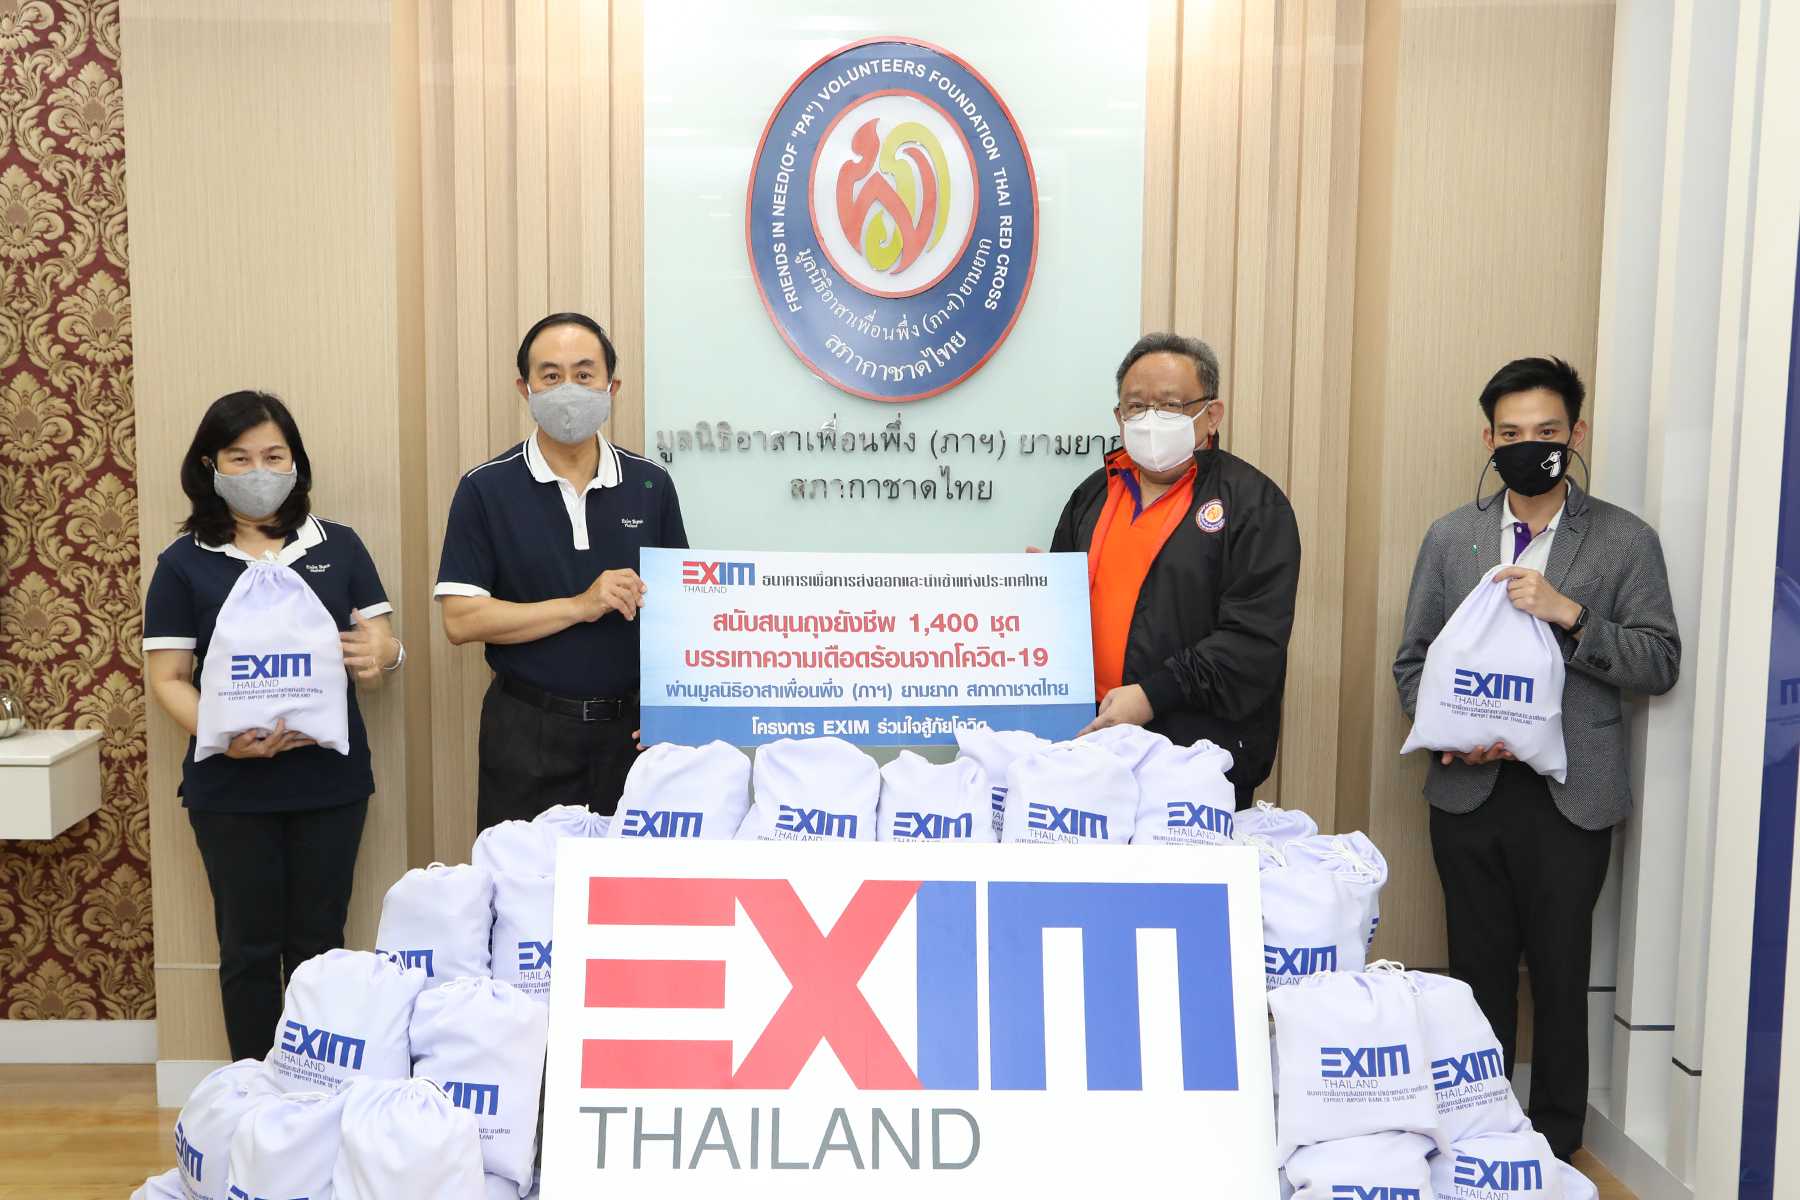 EXIM Thailand and Friends in Need (of “PA”) Volunteers Foundation, Thai Red Cross  Deliver 1,400 Relief Bags to People Affected by Impact of COVID-19